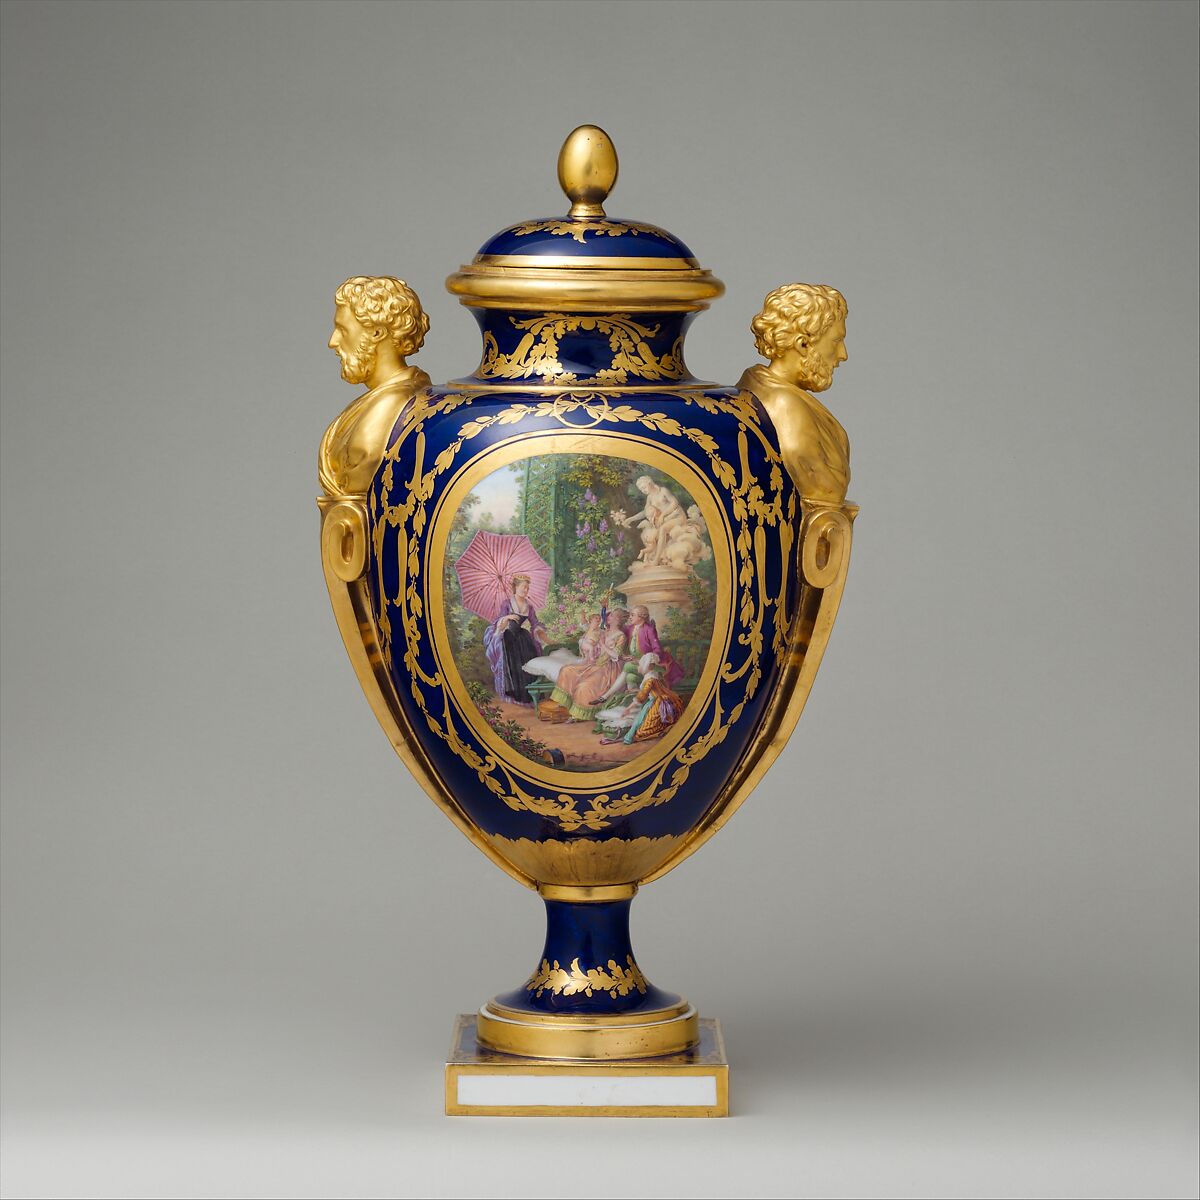 Vase with cover (vase des âges) (one of a pair), Sèvres Manufactory (French, 1740–present), Soft-paste porcelain decorated in polychrome enamels, gold, French, Sèvres 